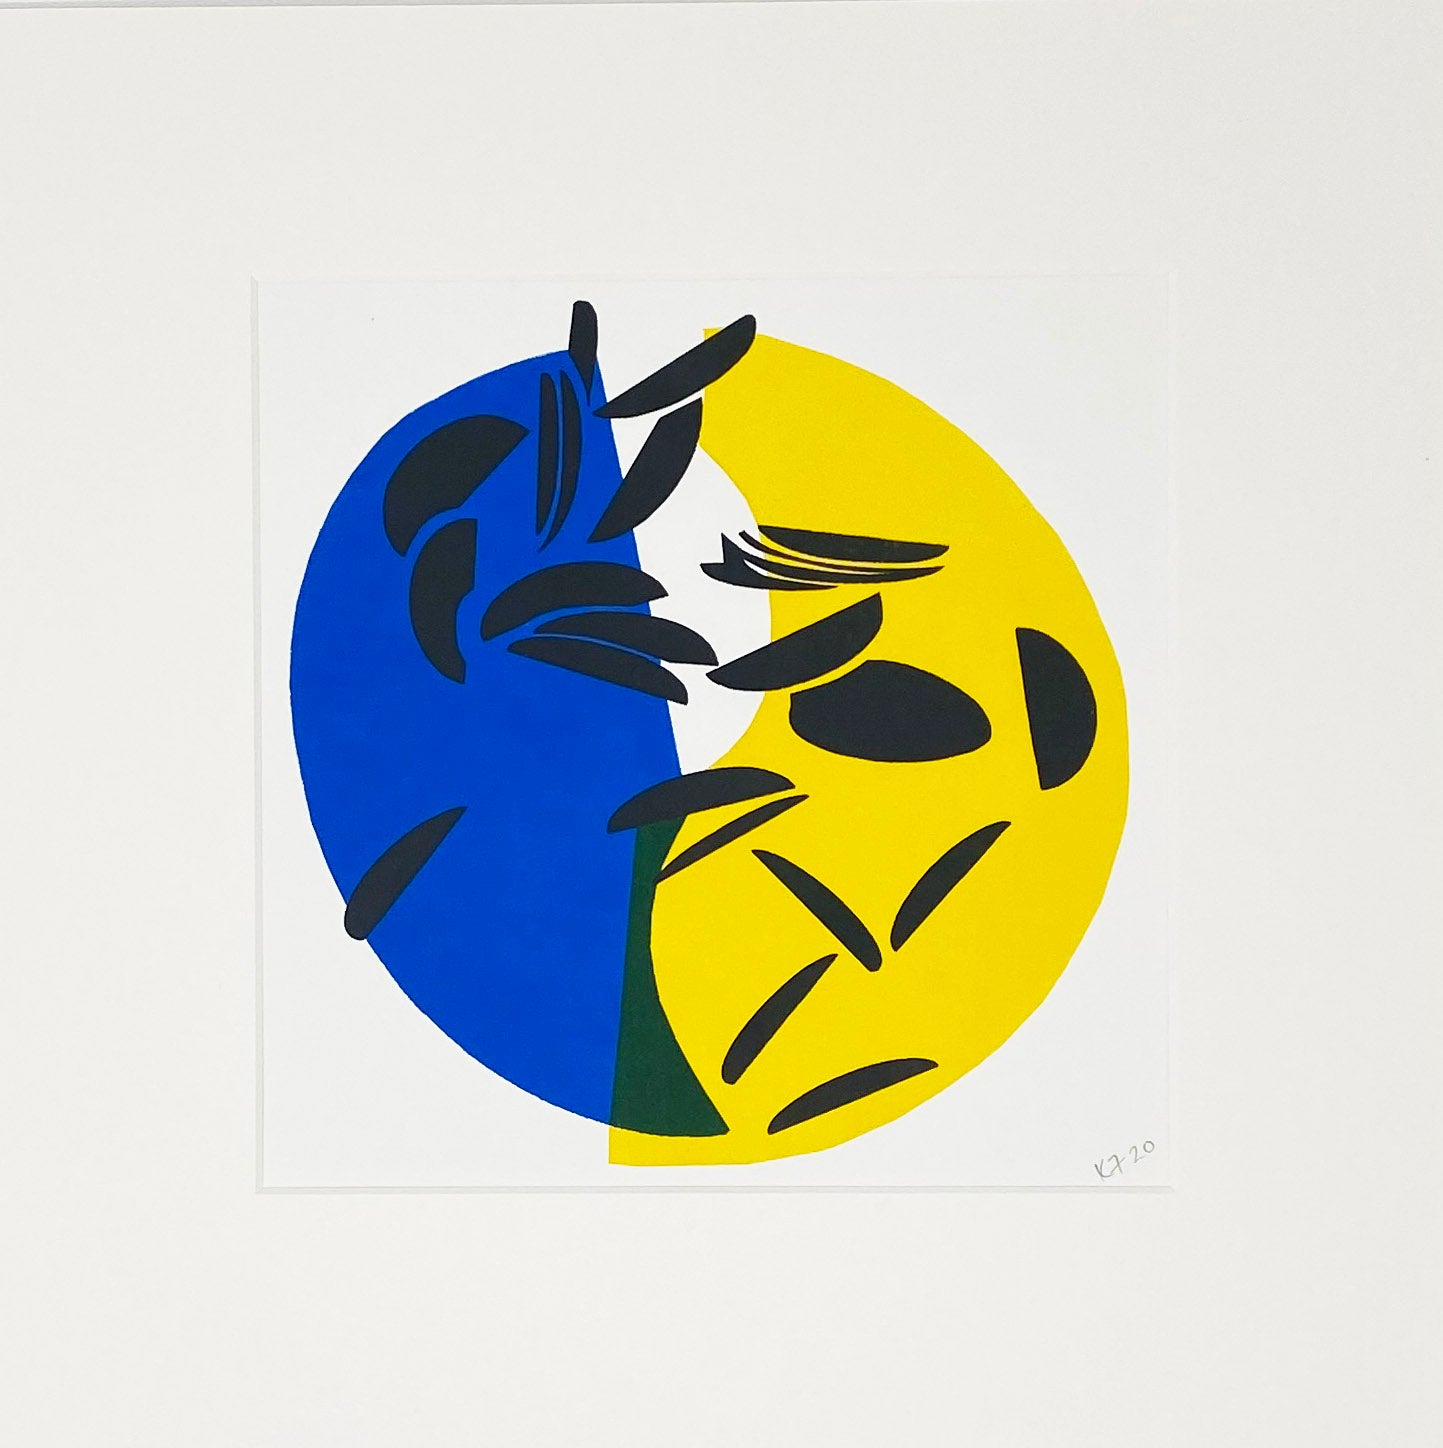 Composition with Yellow & Blue by Kathryn Fox